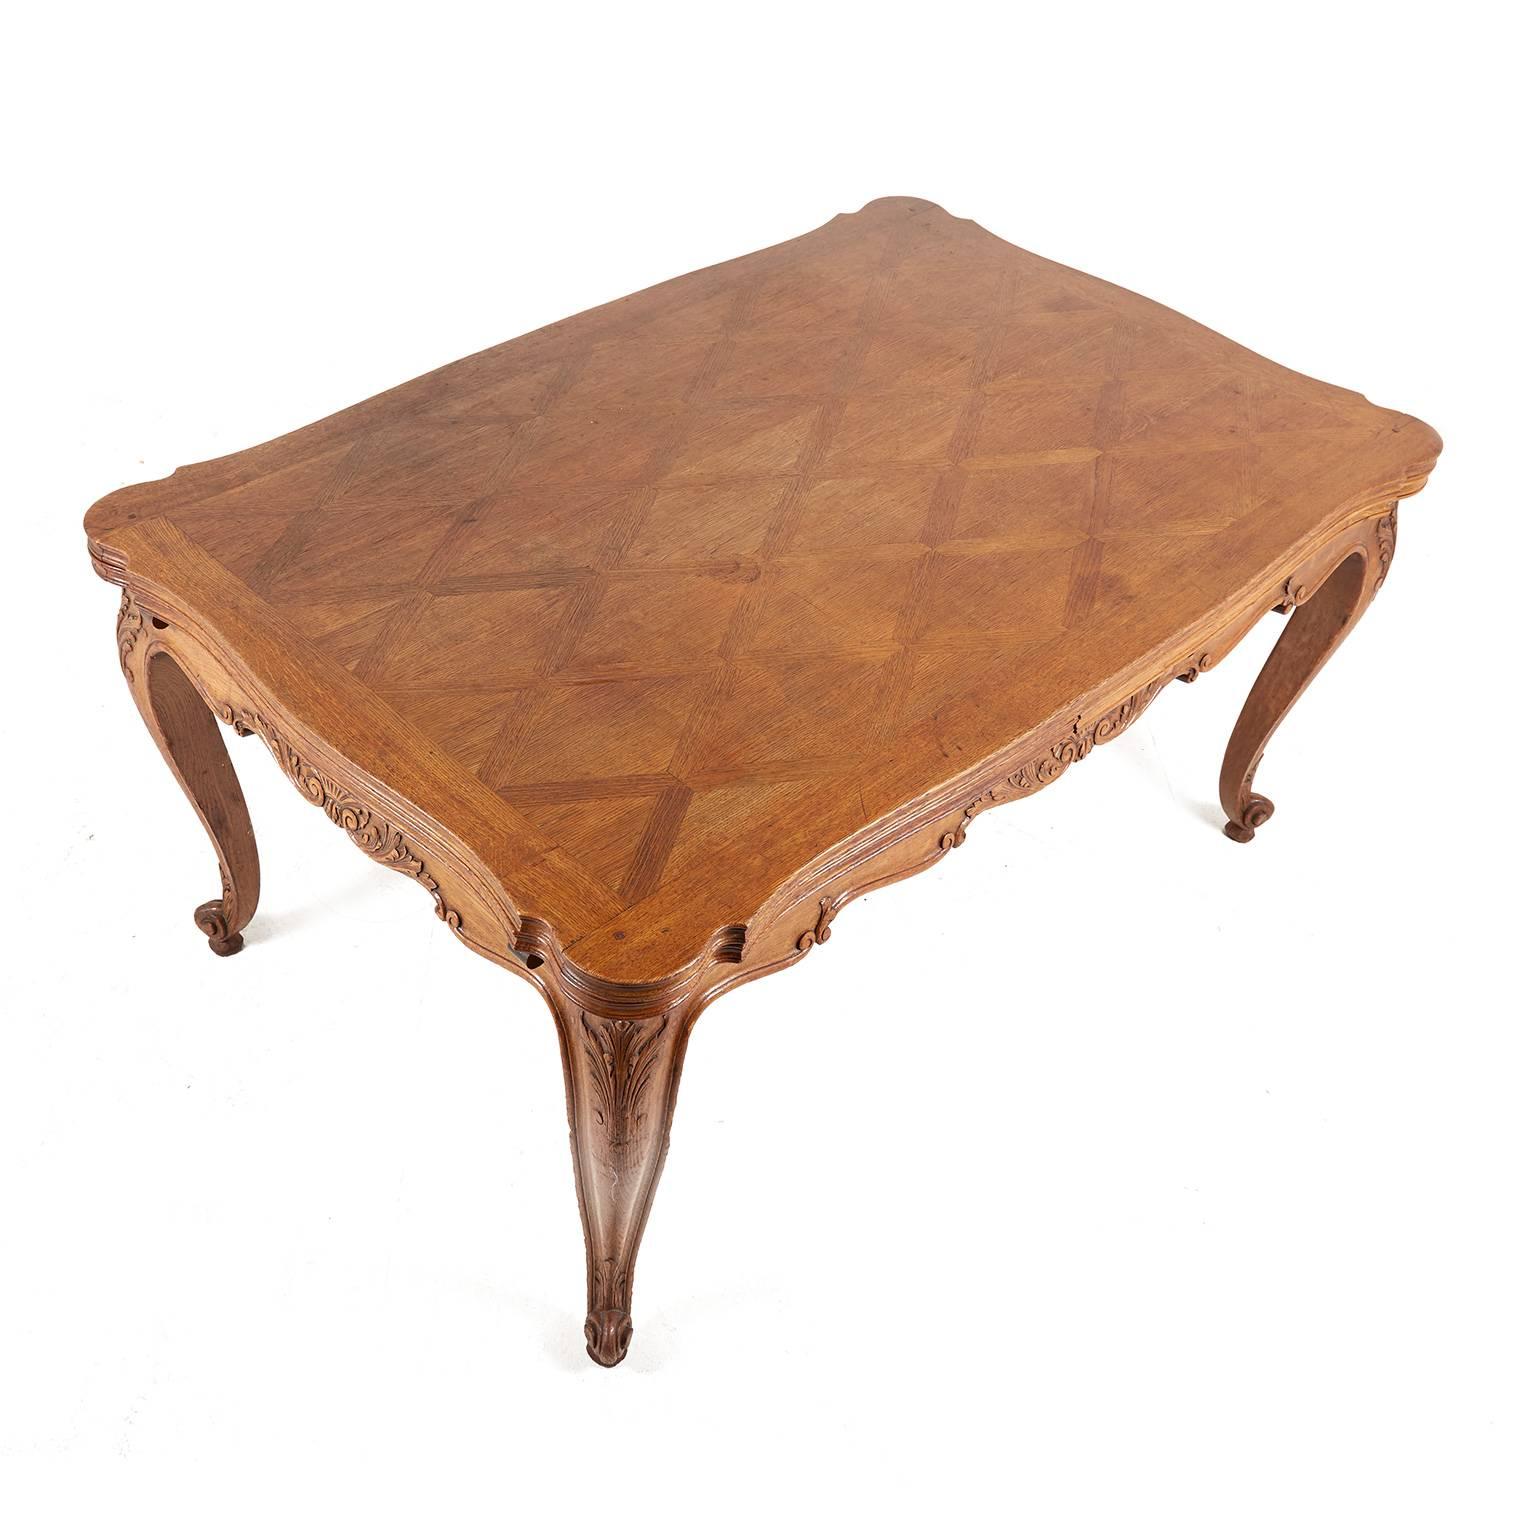 Antique Louis XV-style draw-leaf table, circa 1930. Lovely hand carving on this piece.

Measures: 58? long x 39? deep x 30? tall + 2 - 26? leaves.